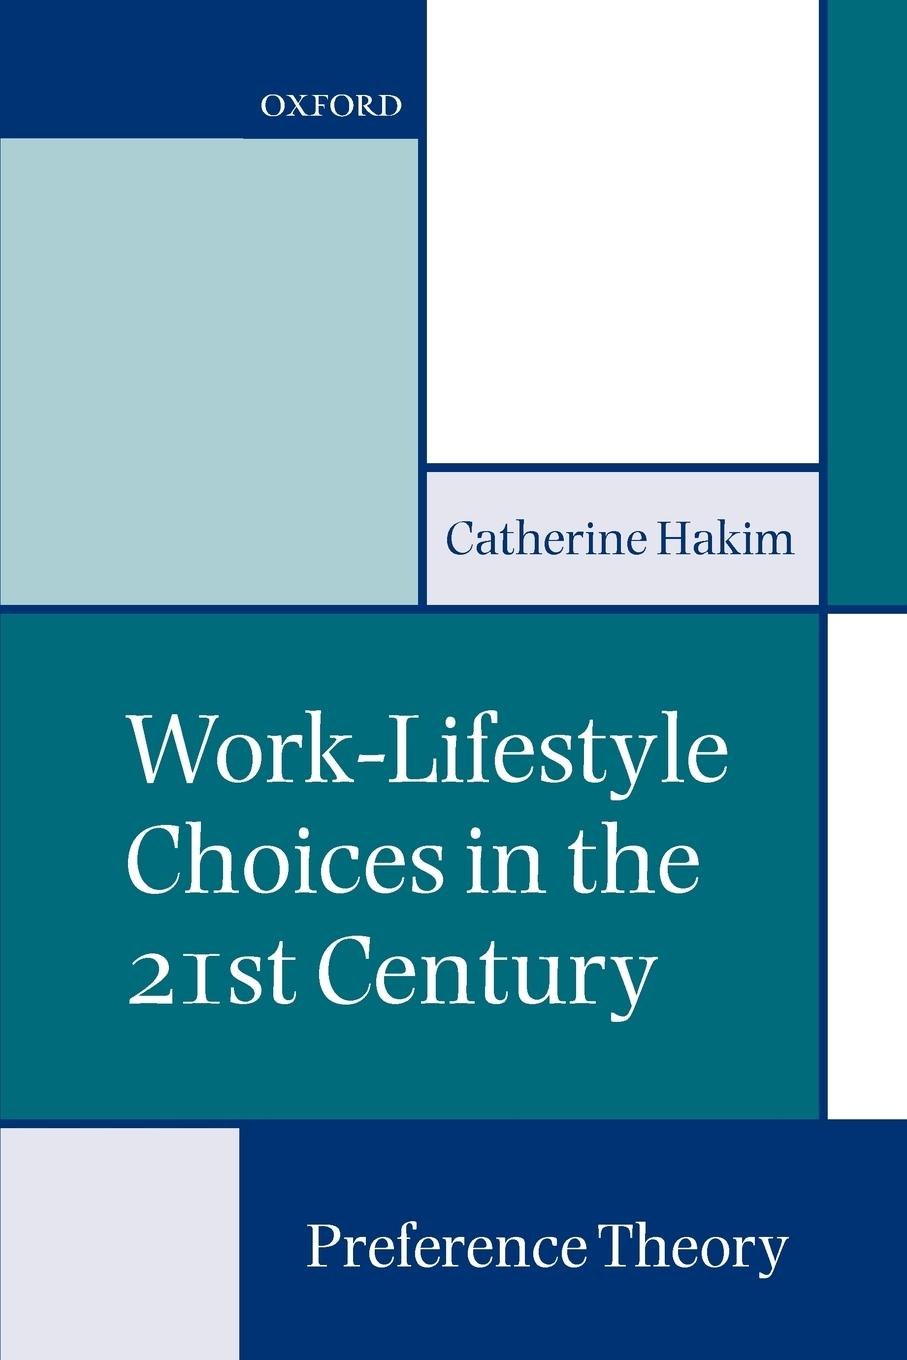 Work-Lifestyle Choices in the 21st Century / Preference Theory / Catherine Hakim / Taschenbuch / Paperback / Englisch / 2000 / OUP Oxford / EAN 9780199242108 - Hakim, Catherine